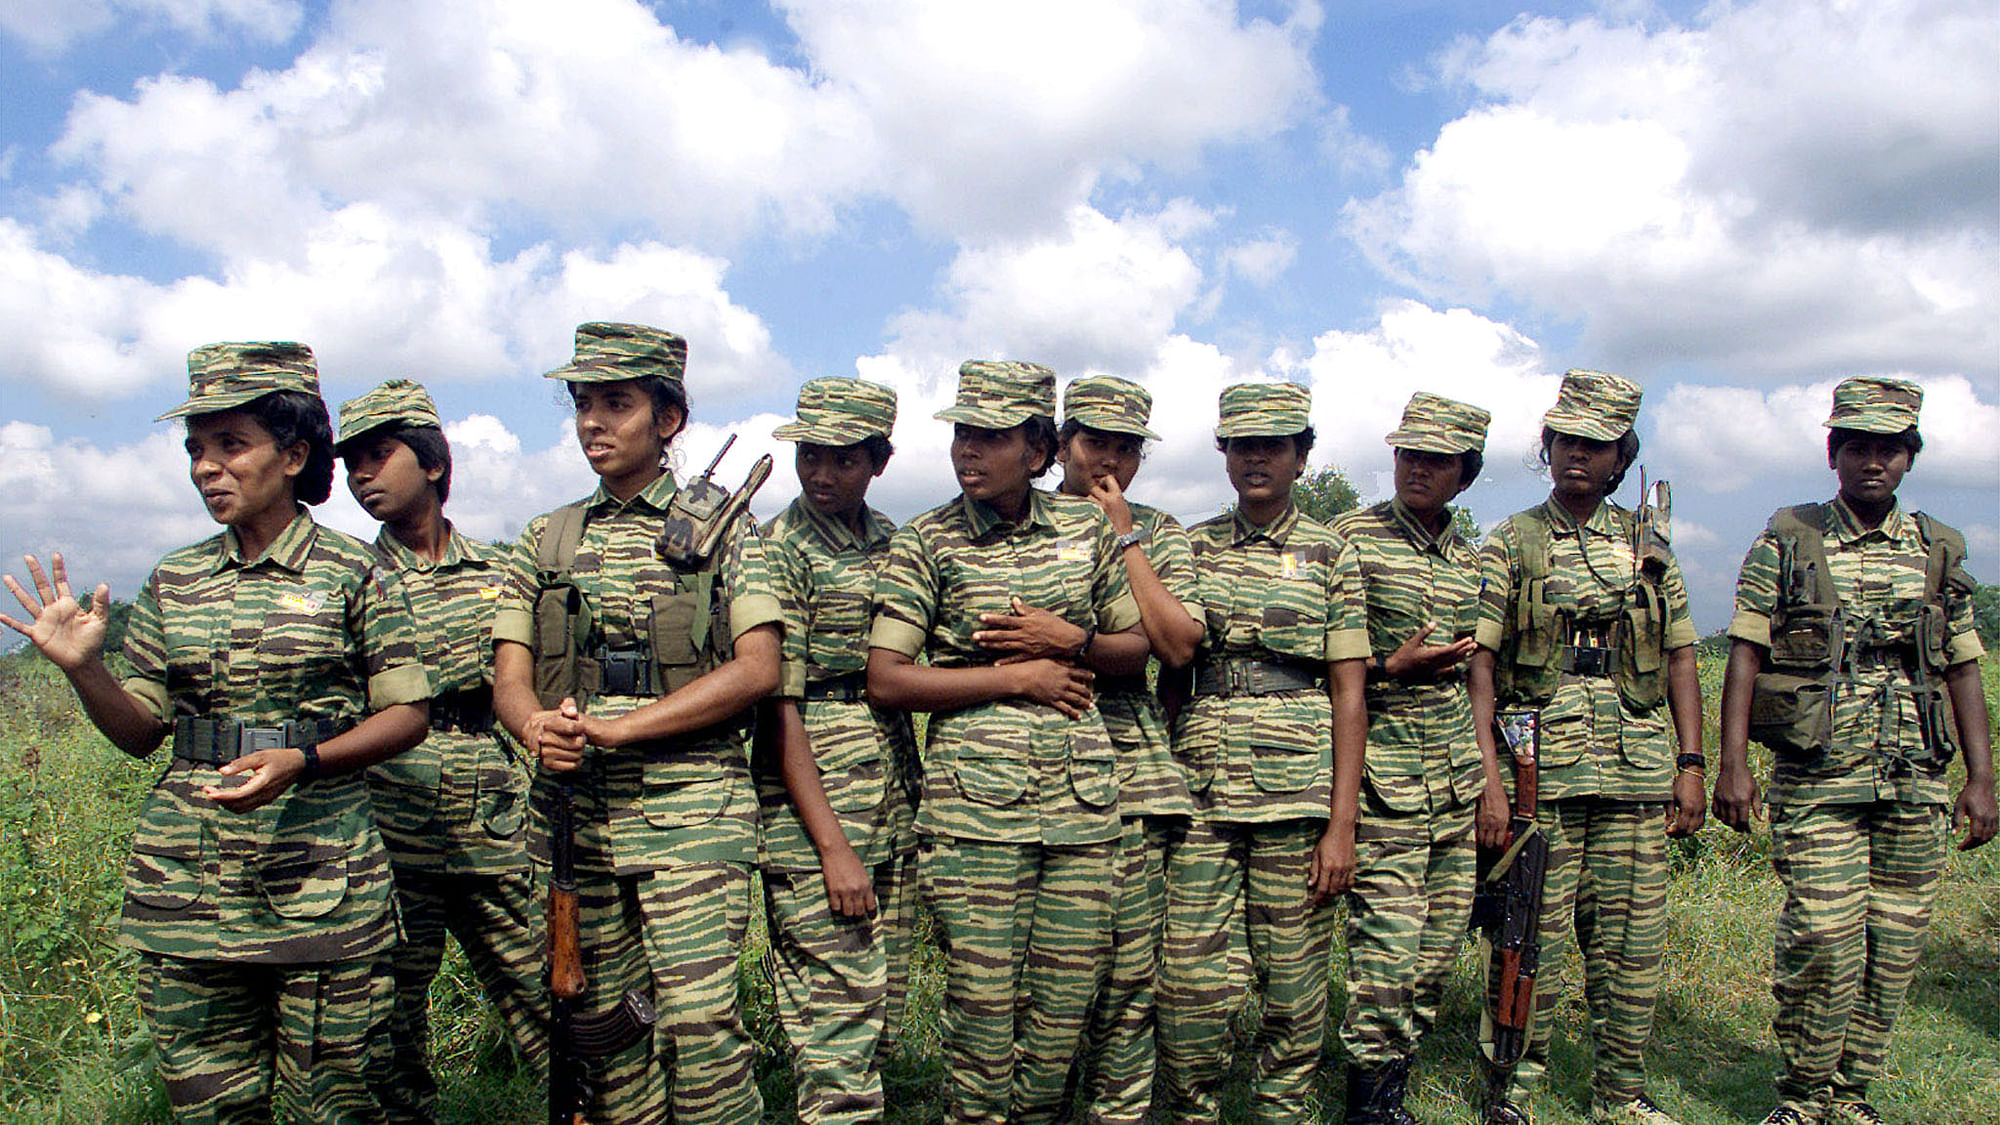 Women fighters of the Liberation Tigers of Tamil Eelam (LTTE) stand on the rebel side of a border crossing in Omanthai in north-central Sri Lanka on 15 February 2002.&nbsp;